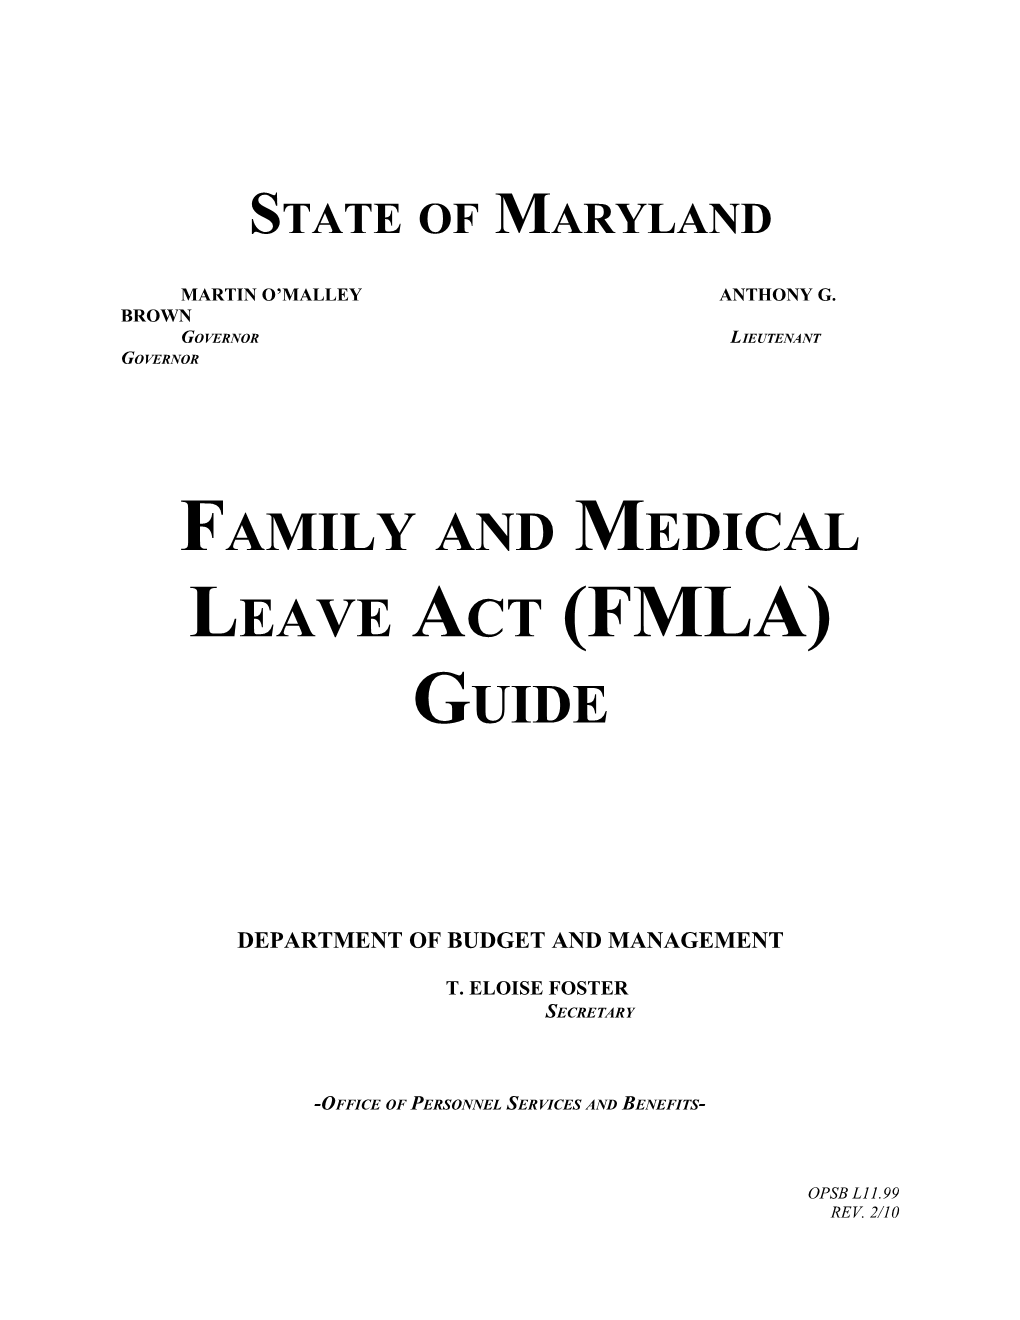 Family Medical Leave Act Guide